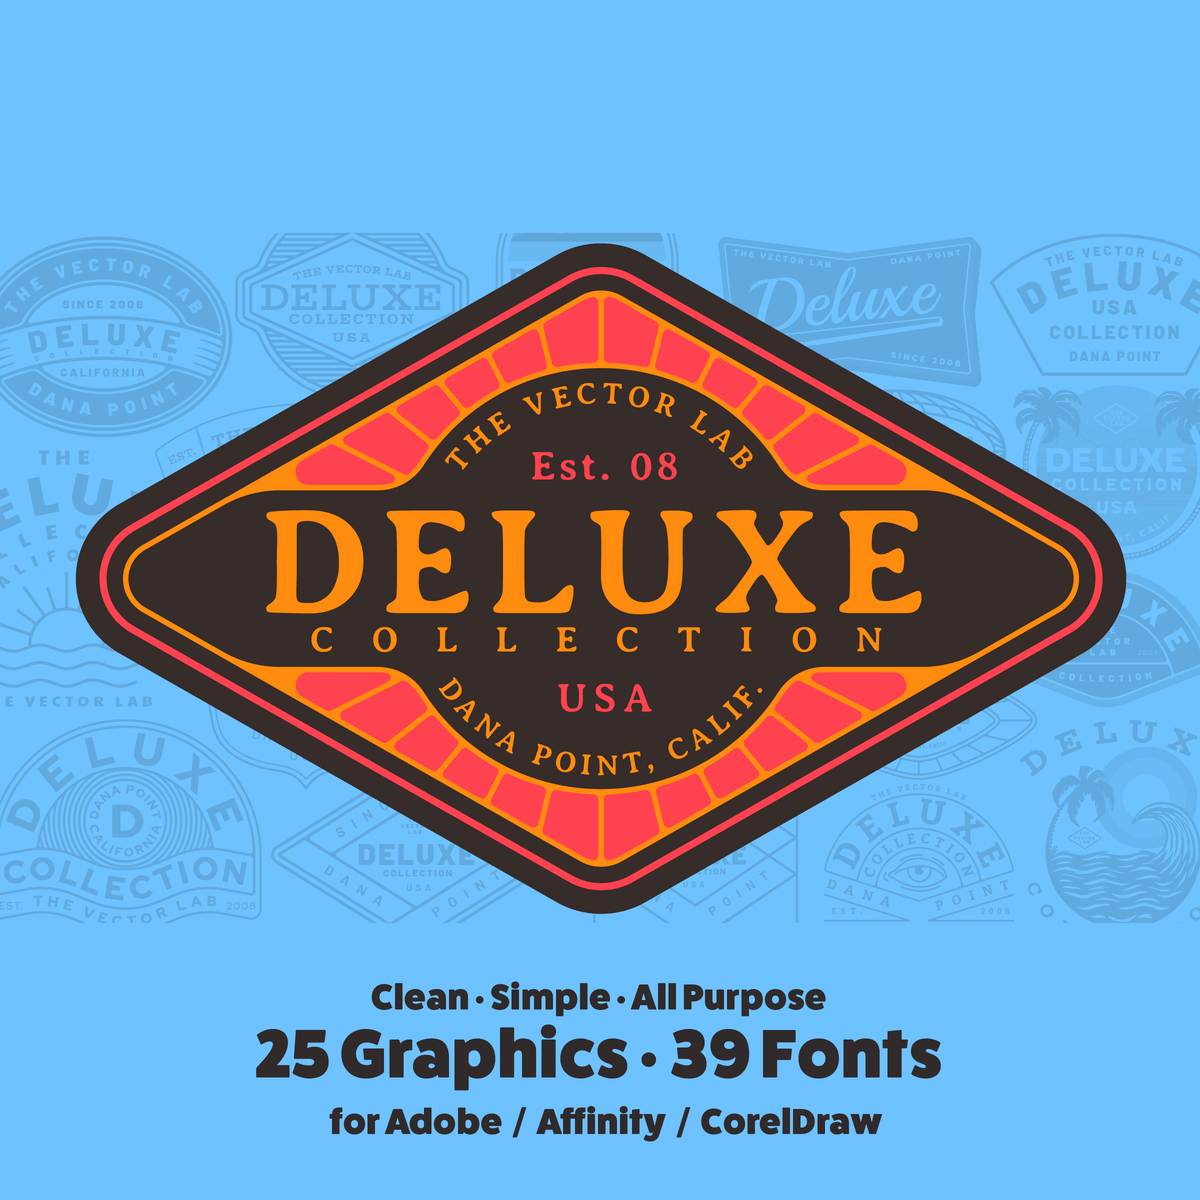 The Deluxe Collection of Graphic &amp; Logo Templates for Adobe Affinity CorelDraw